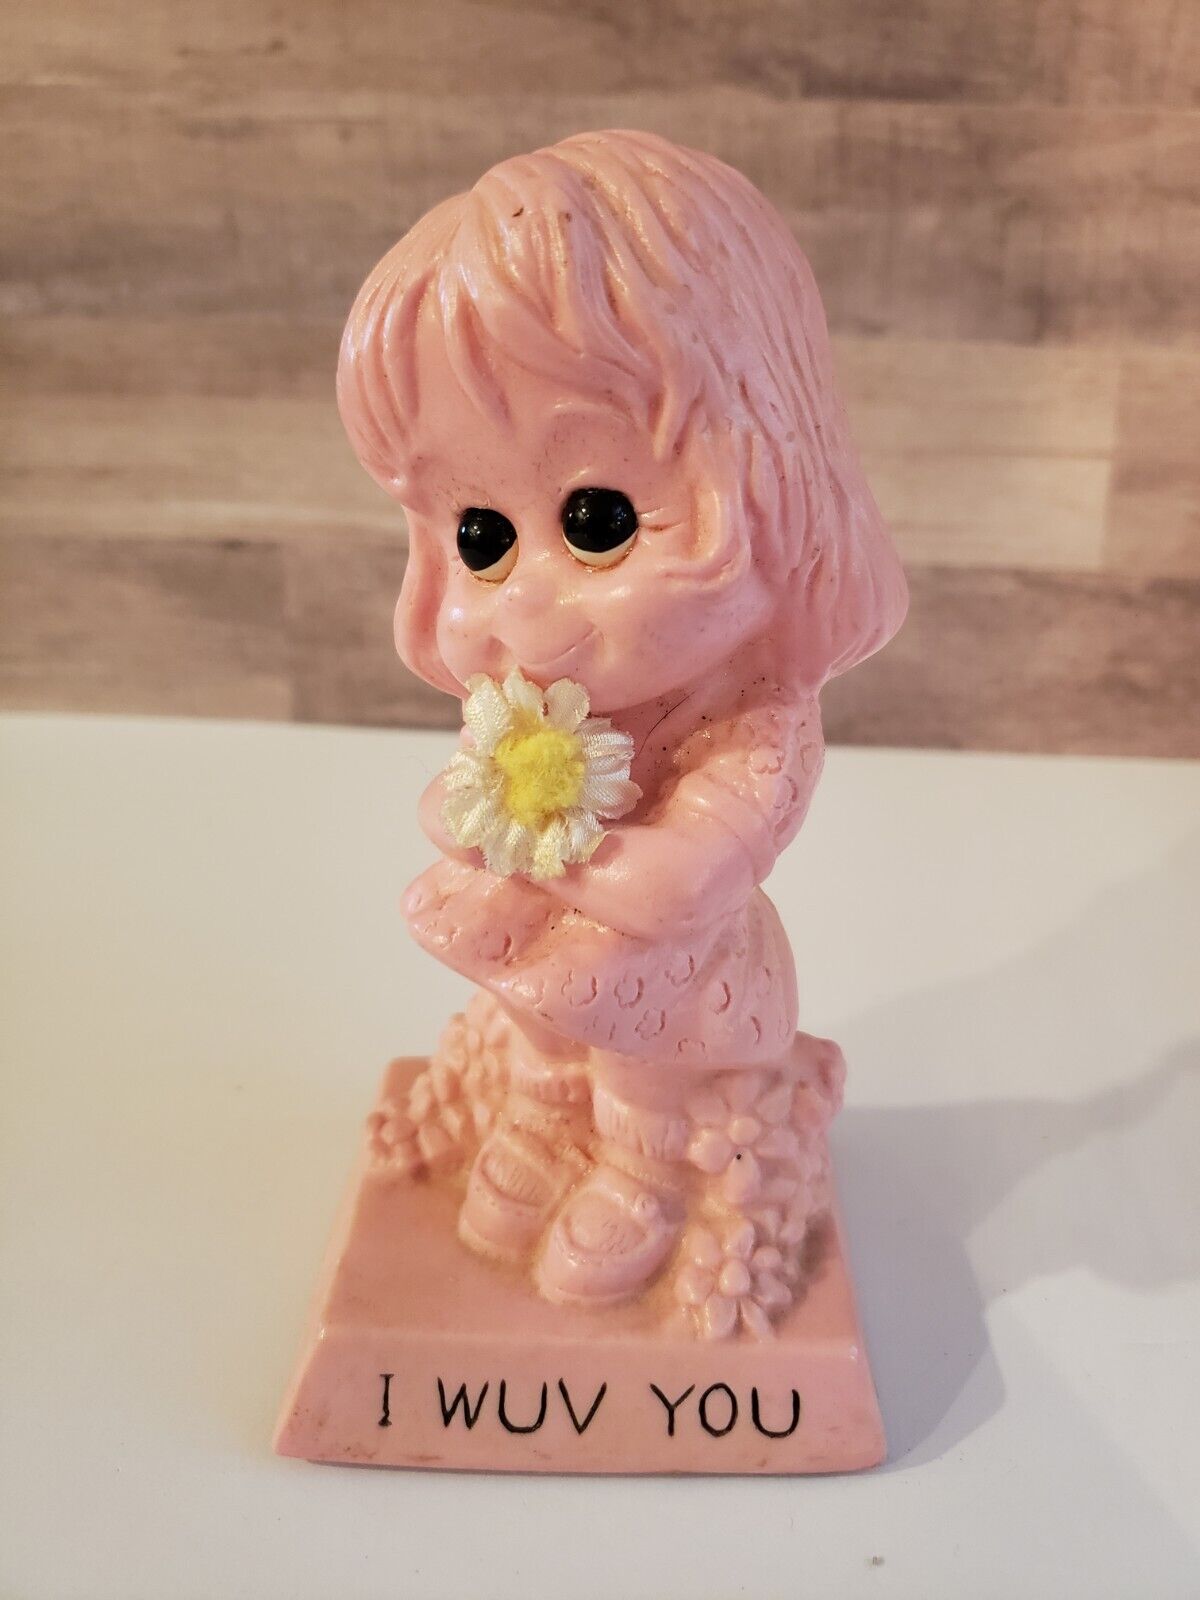 Vintage W&R Berries Wallace Russ Figurine 1973 I WUV YOU